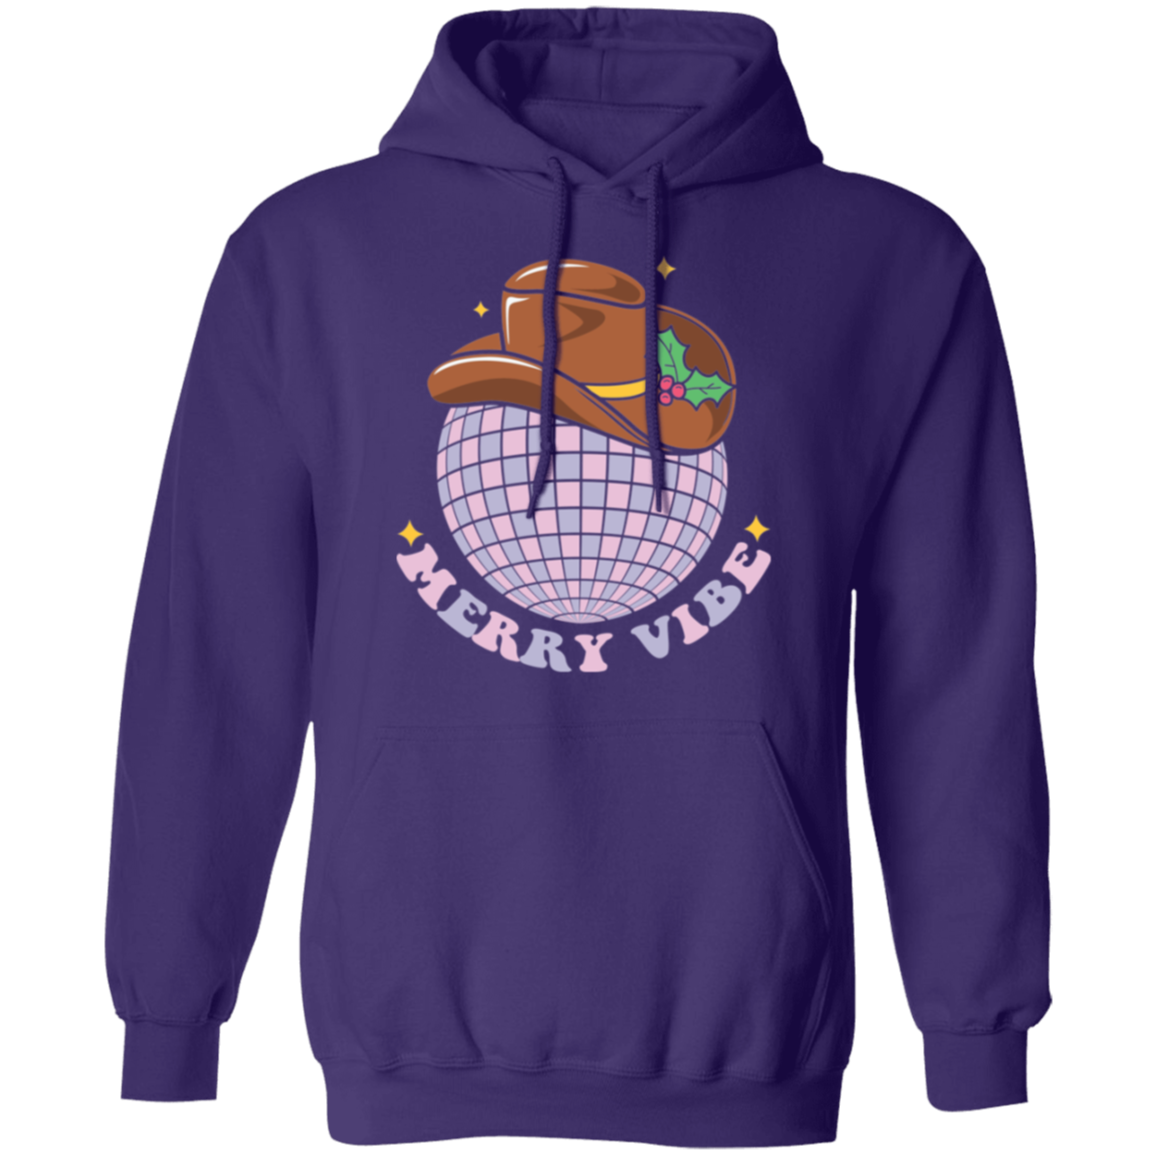 Merry Vibe, Disco Christmas -  Unisex Pullover Hoodie